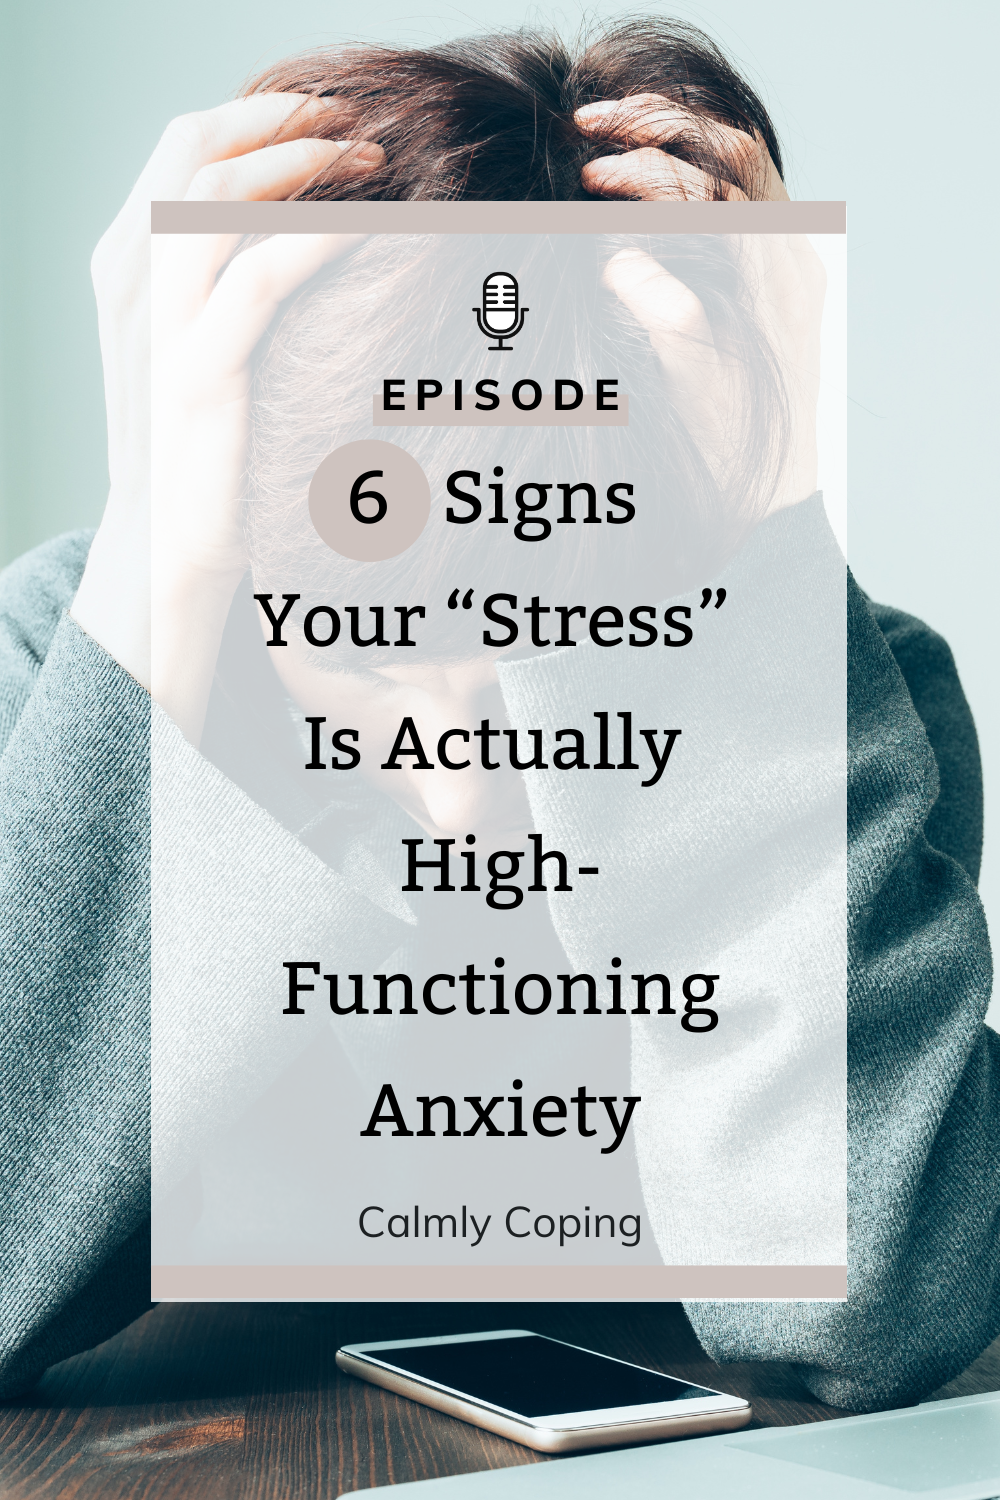 6 Signs Your “Stress” Is Actually High-Functioning Anxiety